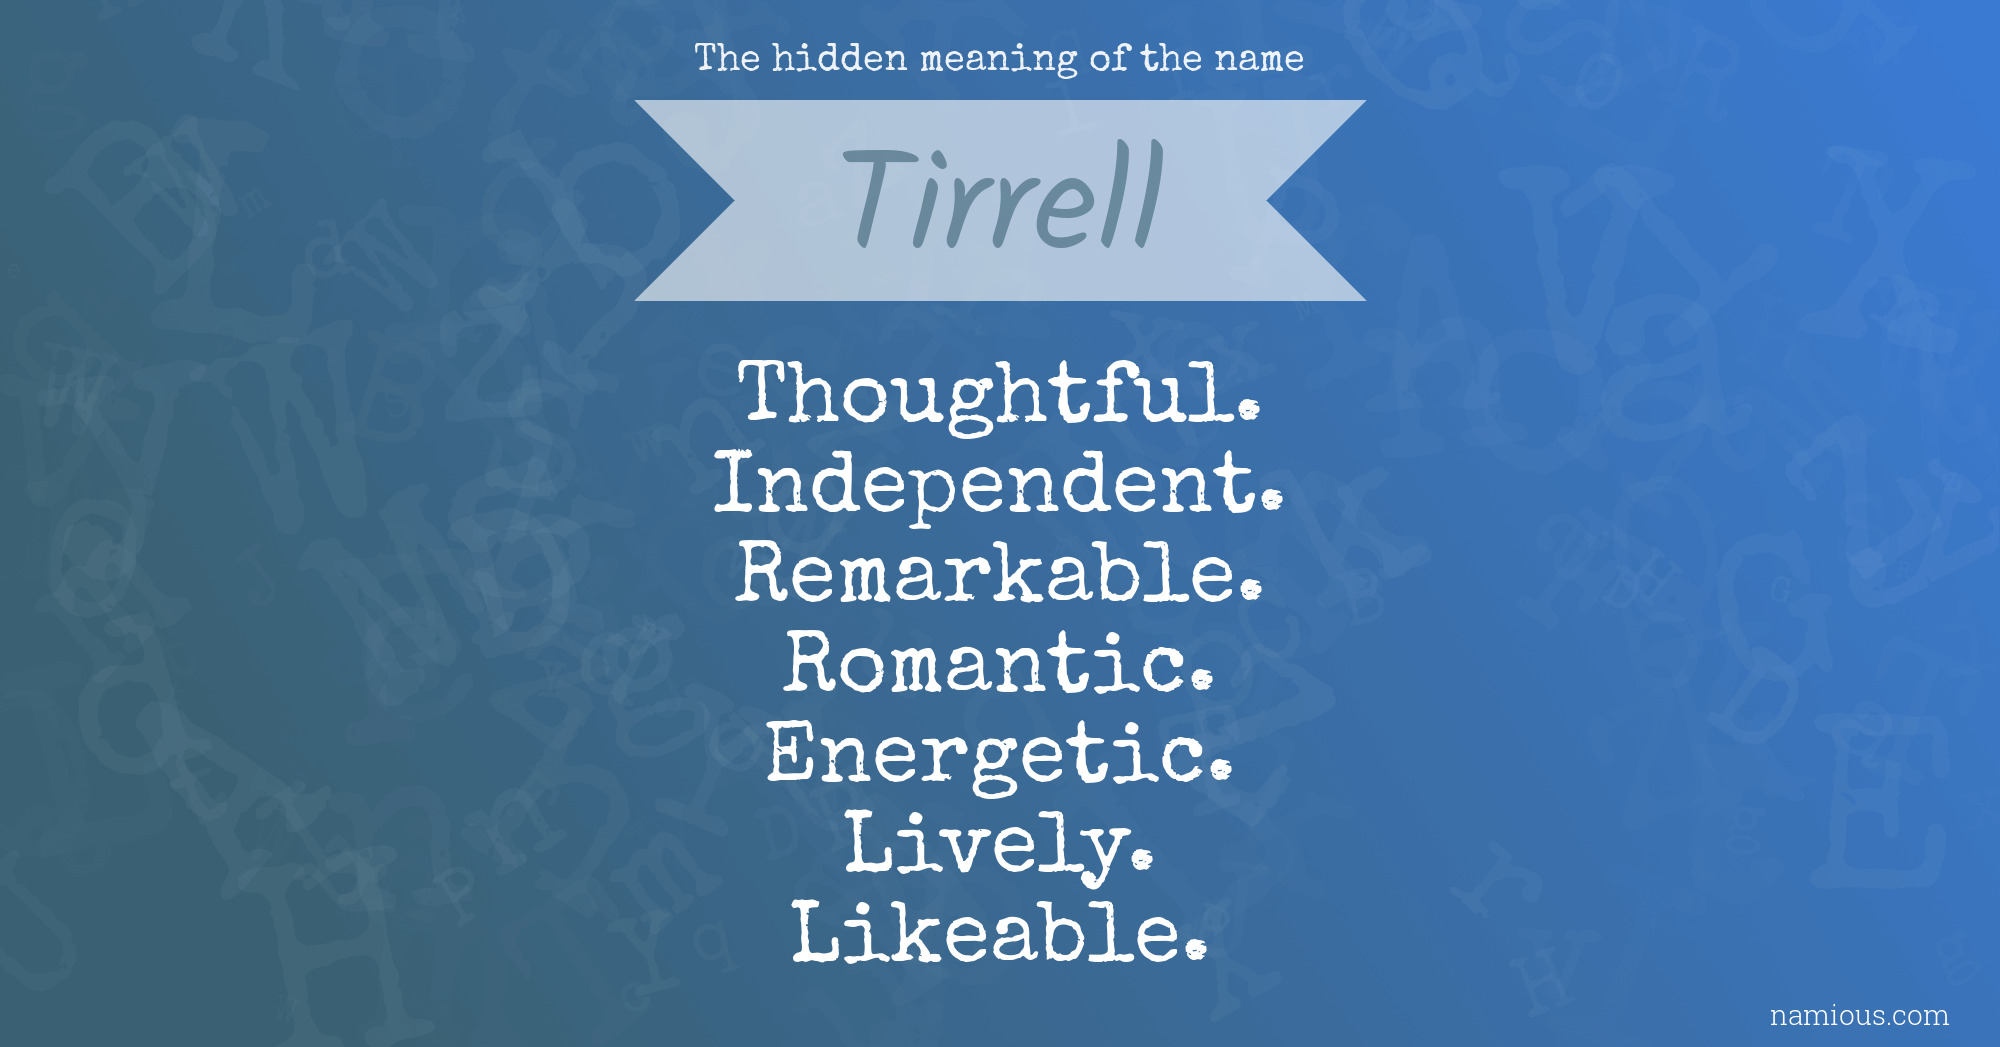 The hidden meaning of the name Tirrell